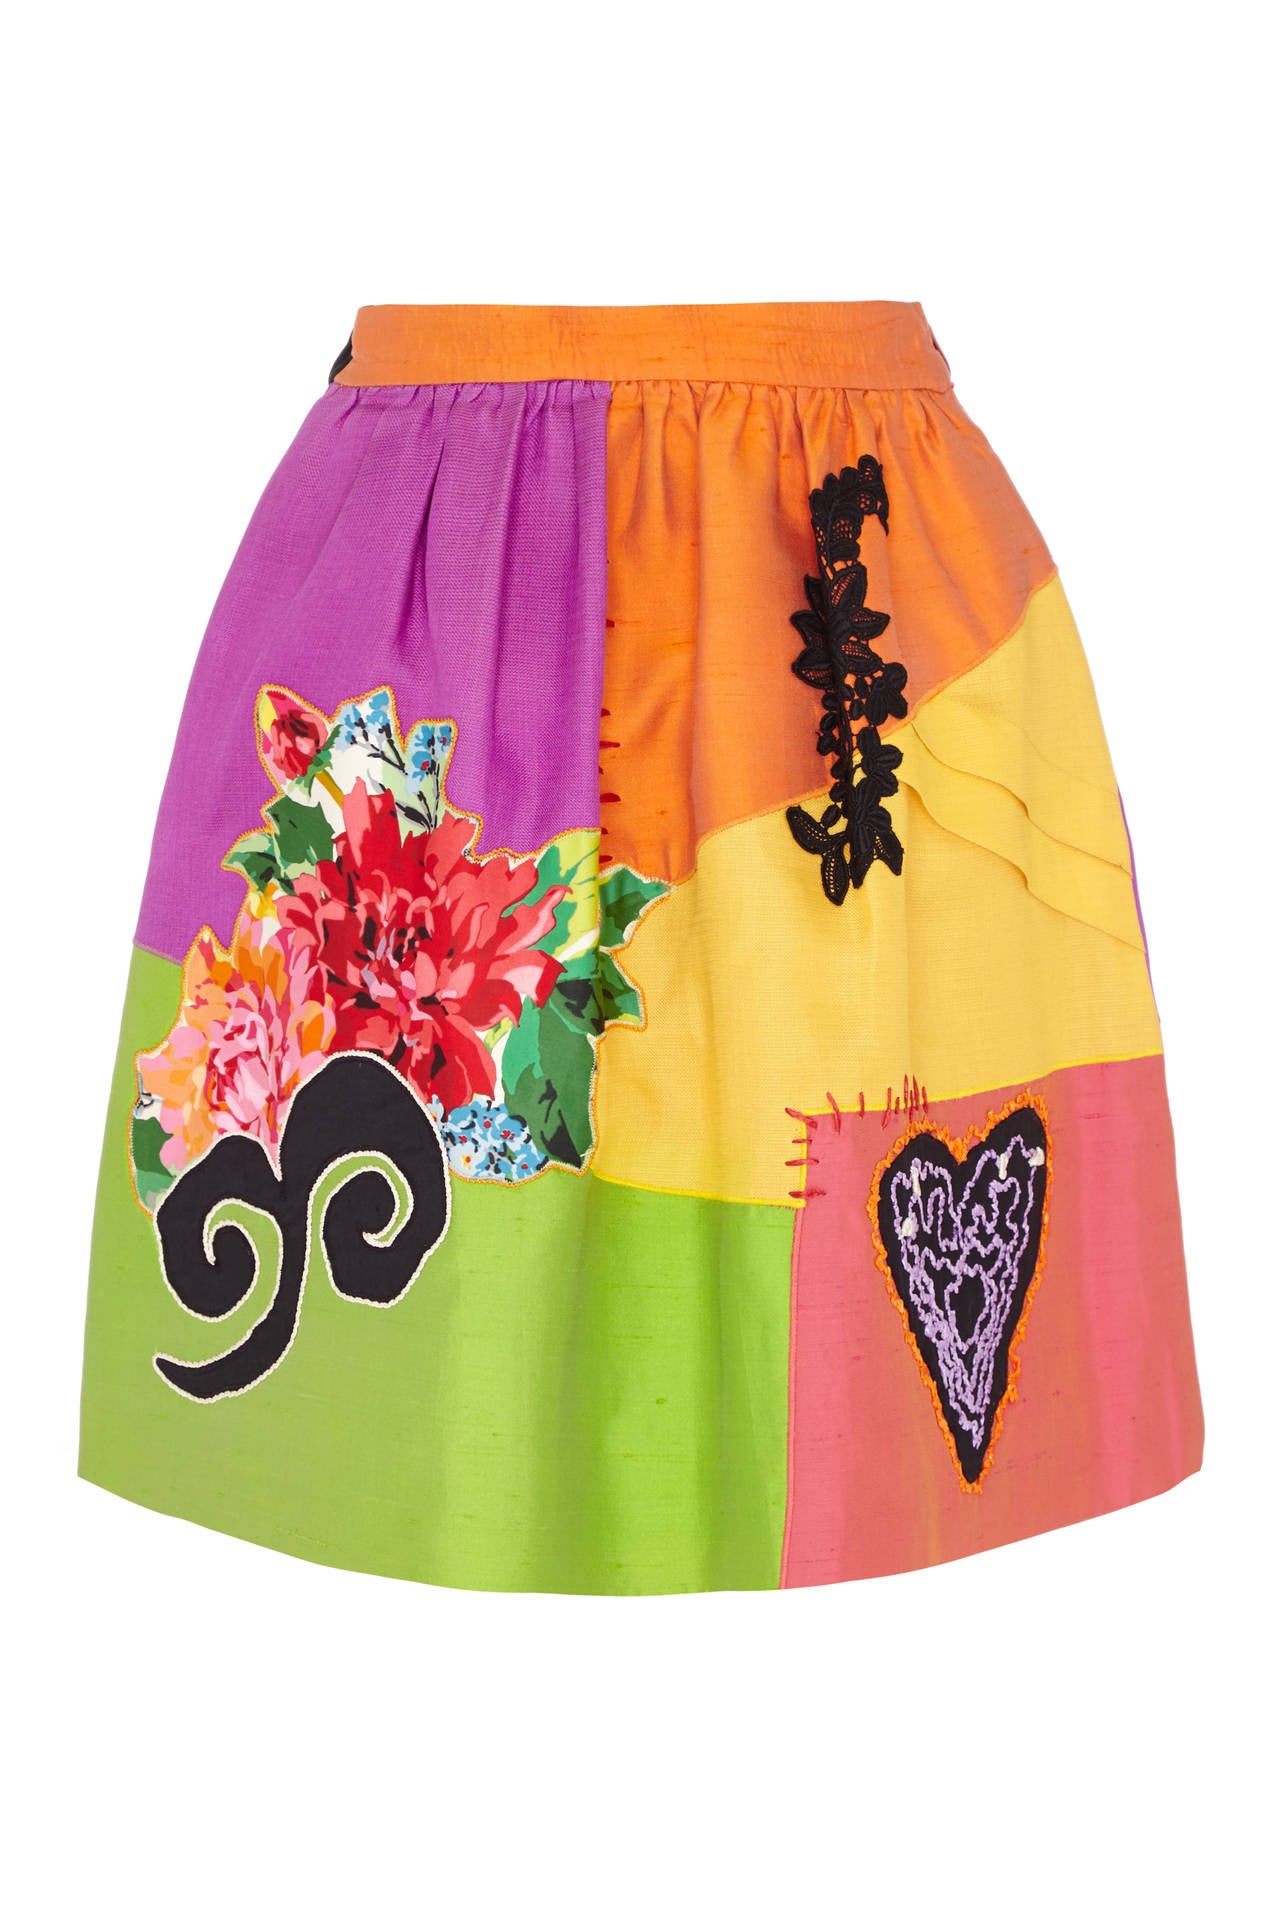 Bright and bold silk knee length skirt from iconic 1990s label Christian Lacroix.  This piece features a patchwork effect with large floral and black appliques. It is fully lined in an orange silk lining, fastens at the side with a zip and has an